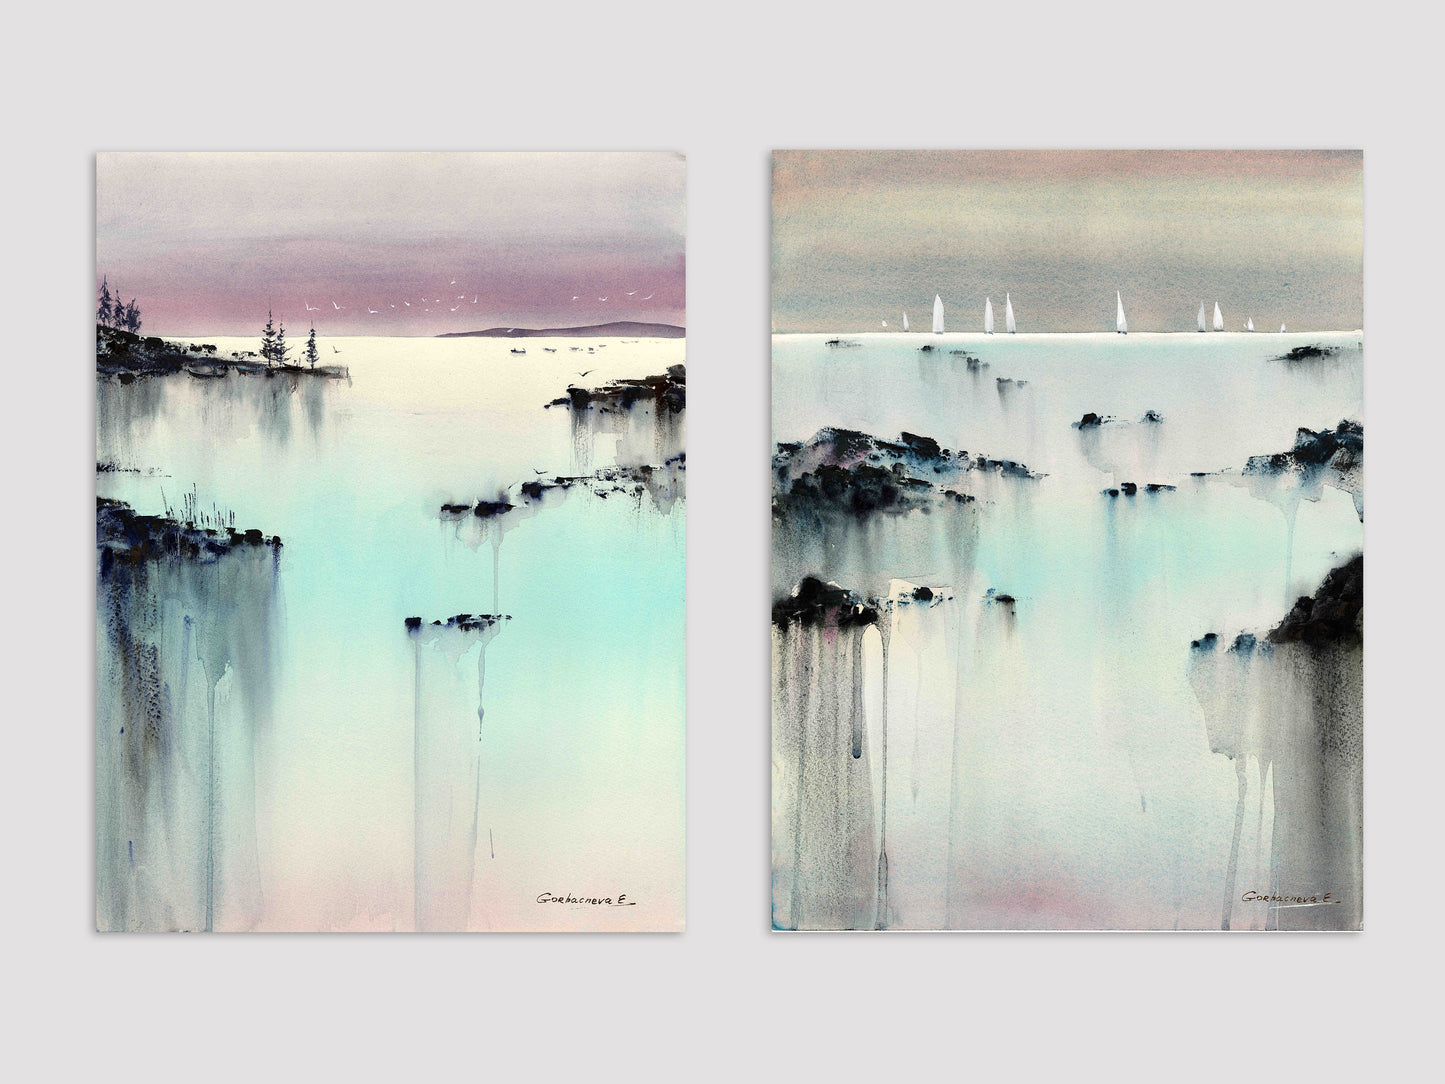 Abstract Art Set of 2 Pieces, Coastal Wall Prints, Modern Design Decor, Turquoise, Pink, Giclee Extra Large Canvas Print